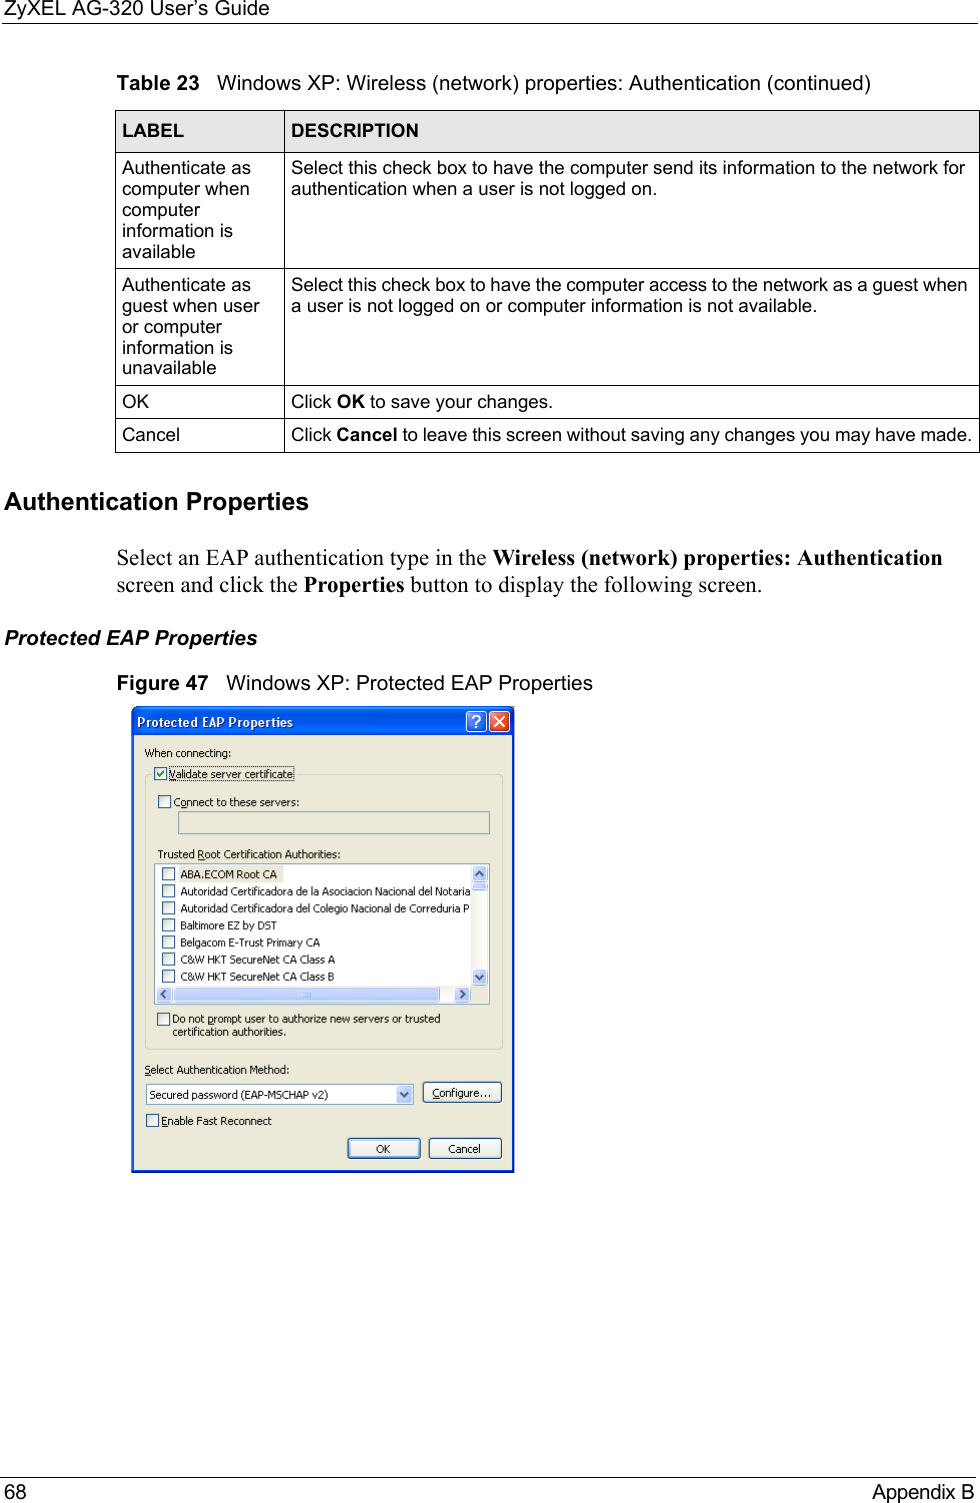 ZyXEL AG-320 User’s Guide68 Appendix BAuthentication PropertiesSelect an EAP authentication type in the Wireless (network) properties: Authentication screen and click the Properties button to display the following screen. Protected EAP PropertiesFigure 47   Windows XP: Protected EAP PropertiesAuthenticate as computer when computer information is availableSelect this check box to have the computer send its information to the network for authentication when a user is not logged on.Authenticate as guest when user or computer information is unavailableSelect this check box to have the computer access to the network as a guest when a user is not logged on or computer information is not available.OK Click OK to save your changes.Cancel Click Cancel to leave this screen without saving any changes you may have made.Table 23   Windows XP: Wireless (network) properties: Authentication (continued)LABEL DESCRIPTION